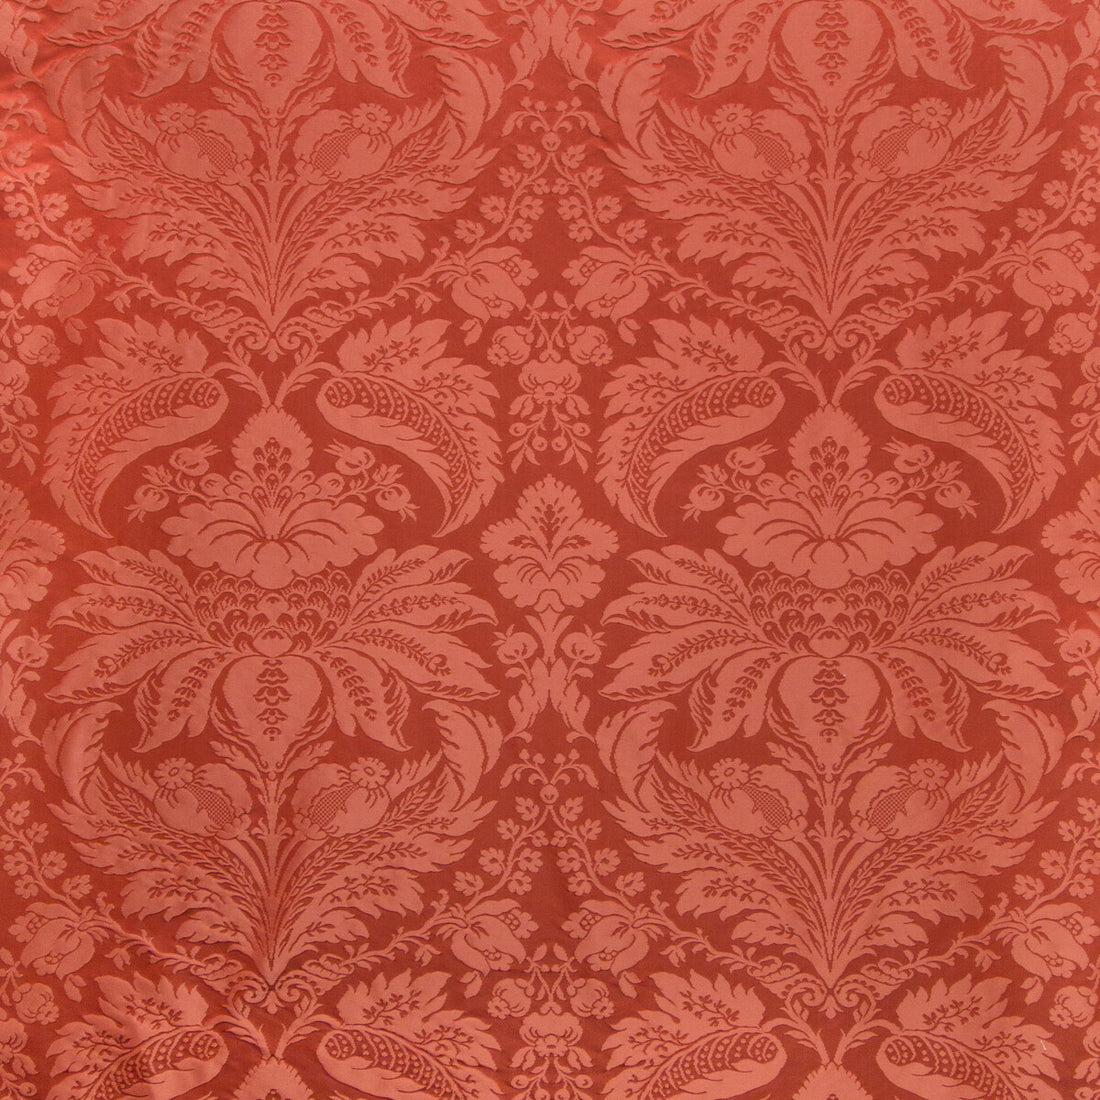 Damask Pierre fabric in pepper red color - pattern 8013188.119.0 - by Brunschwig &amp; Fils in the B&amp;F Showroom Exclusive 2019 collection